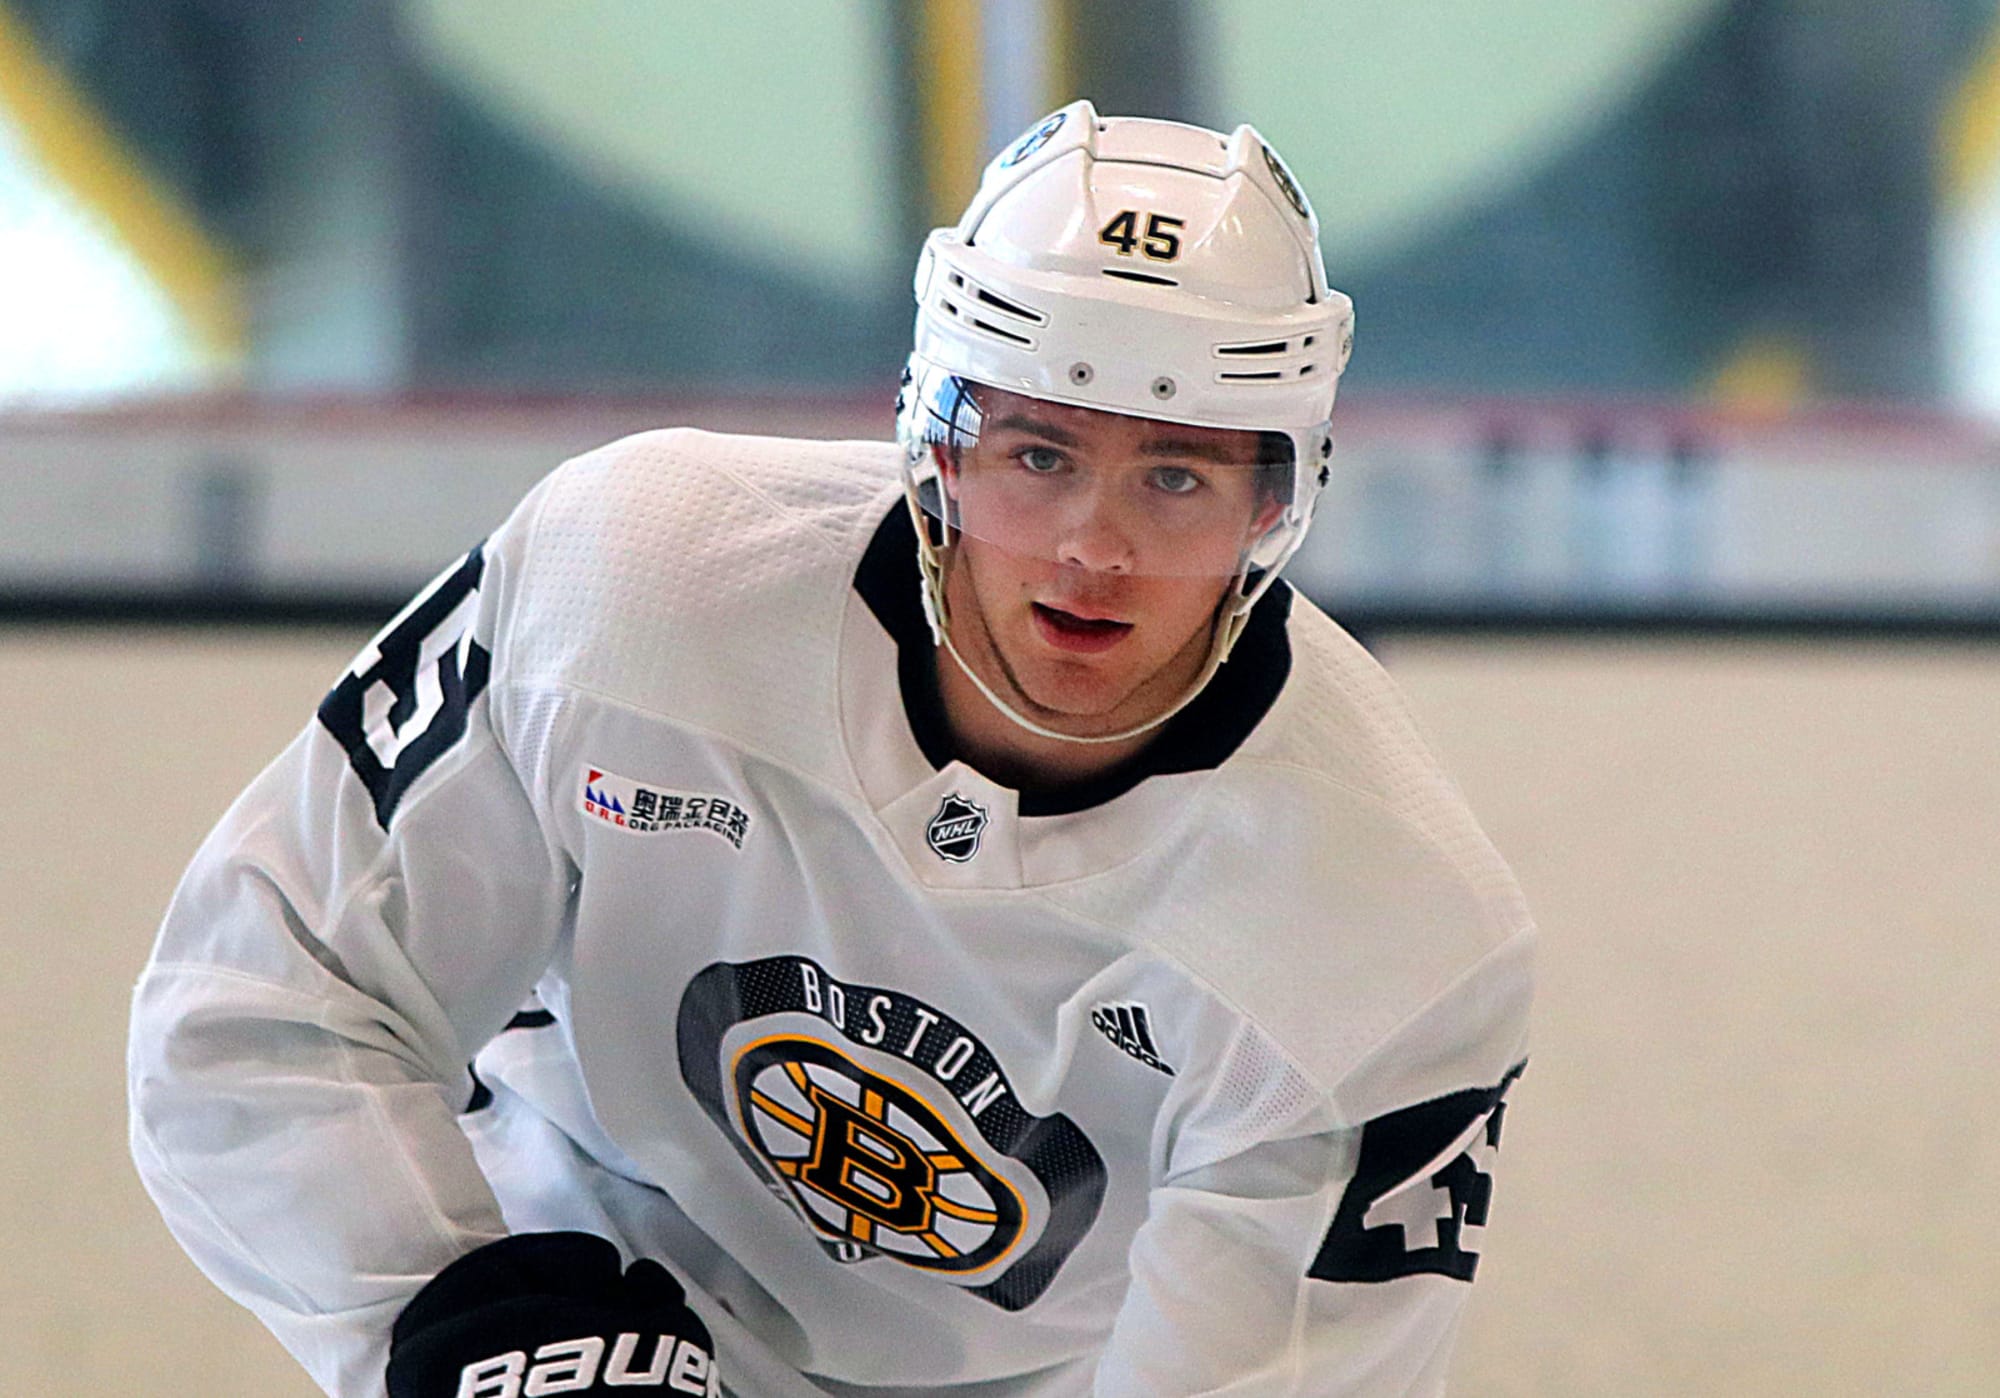 Bruins Announce Roster and Schedule for Rookie Camp and Prospects